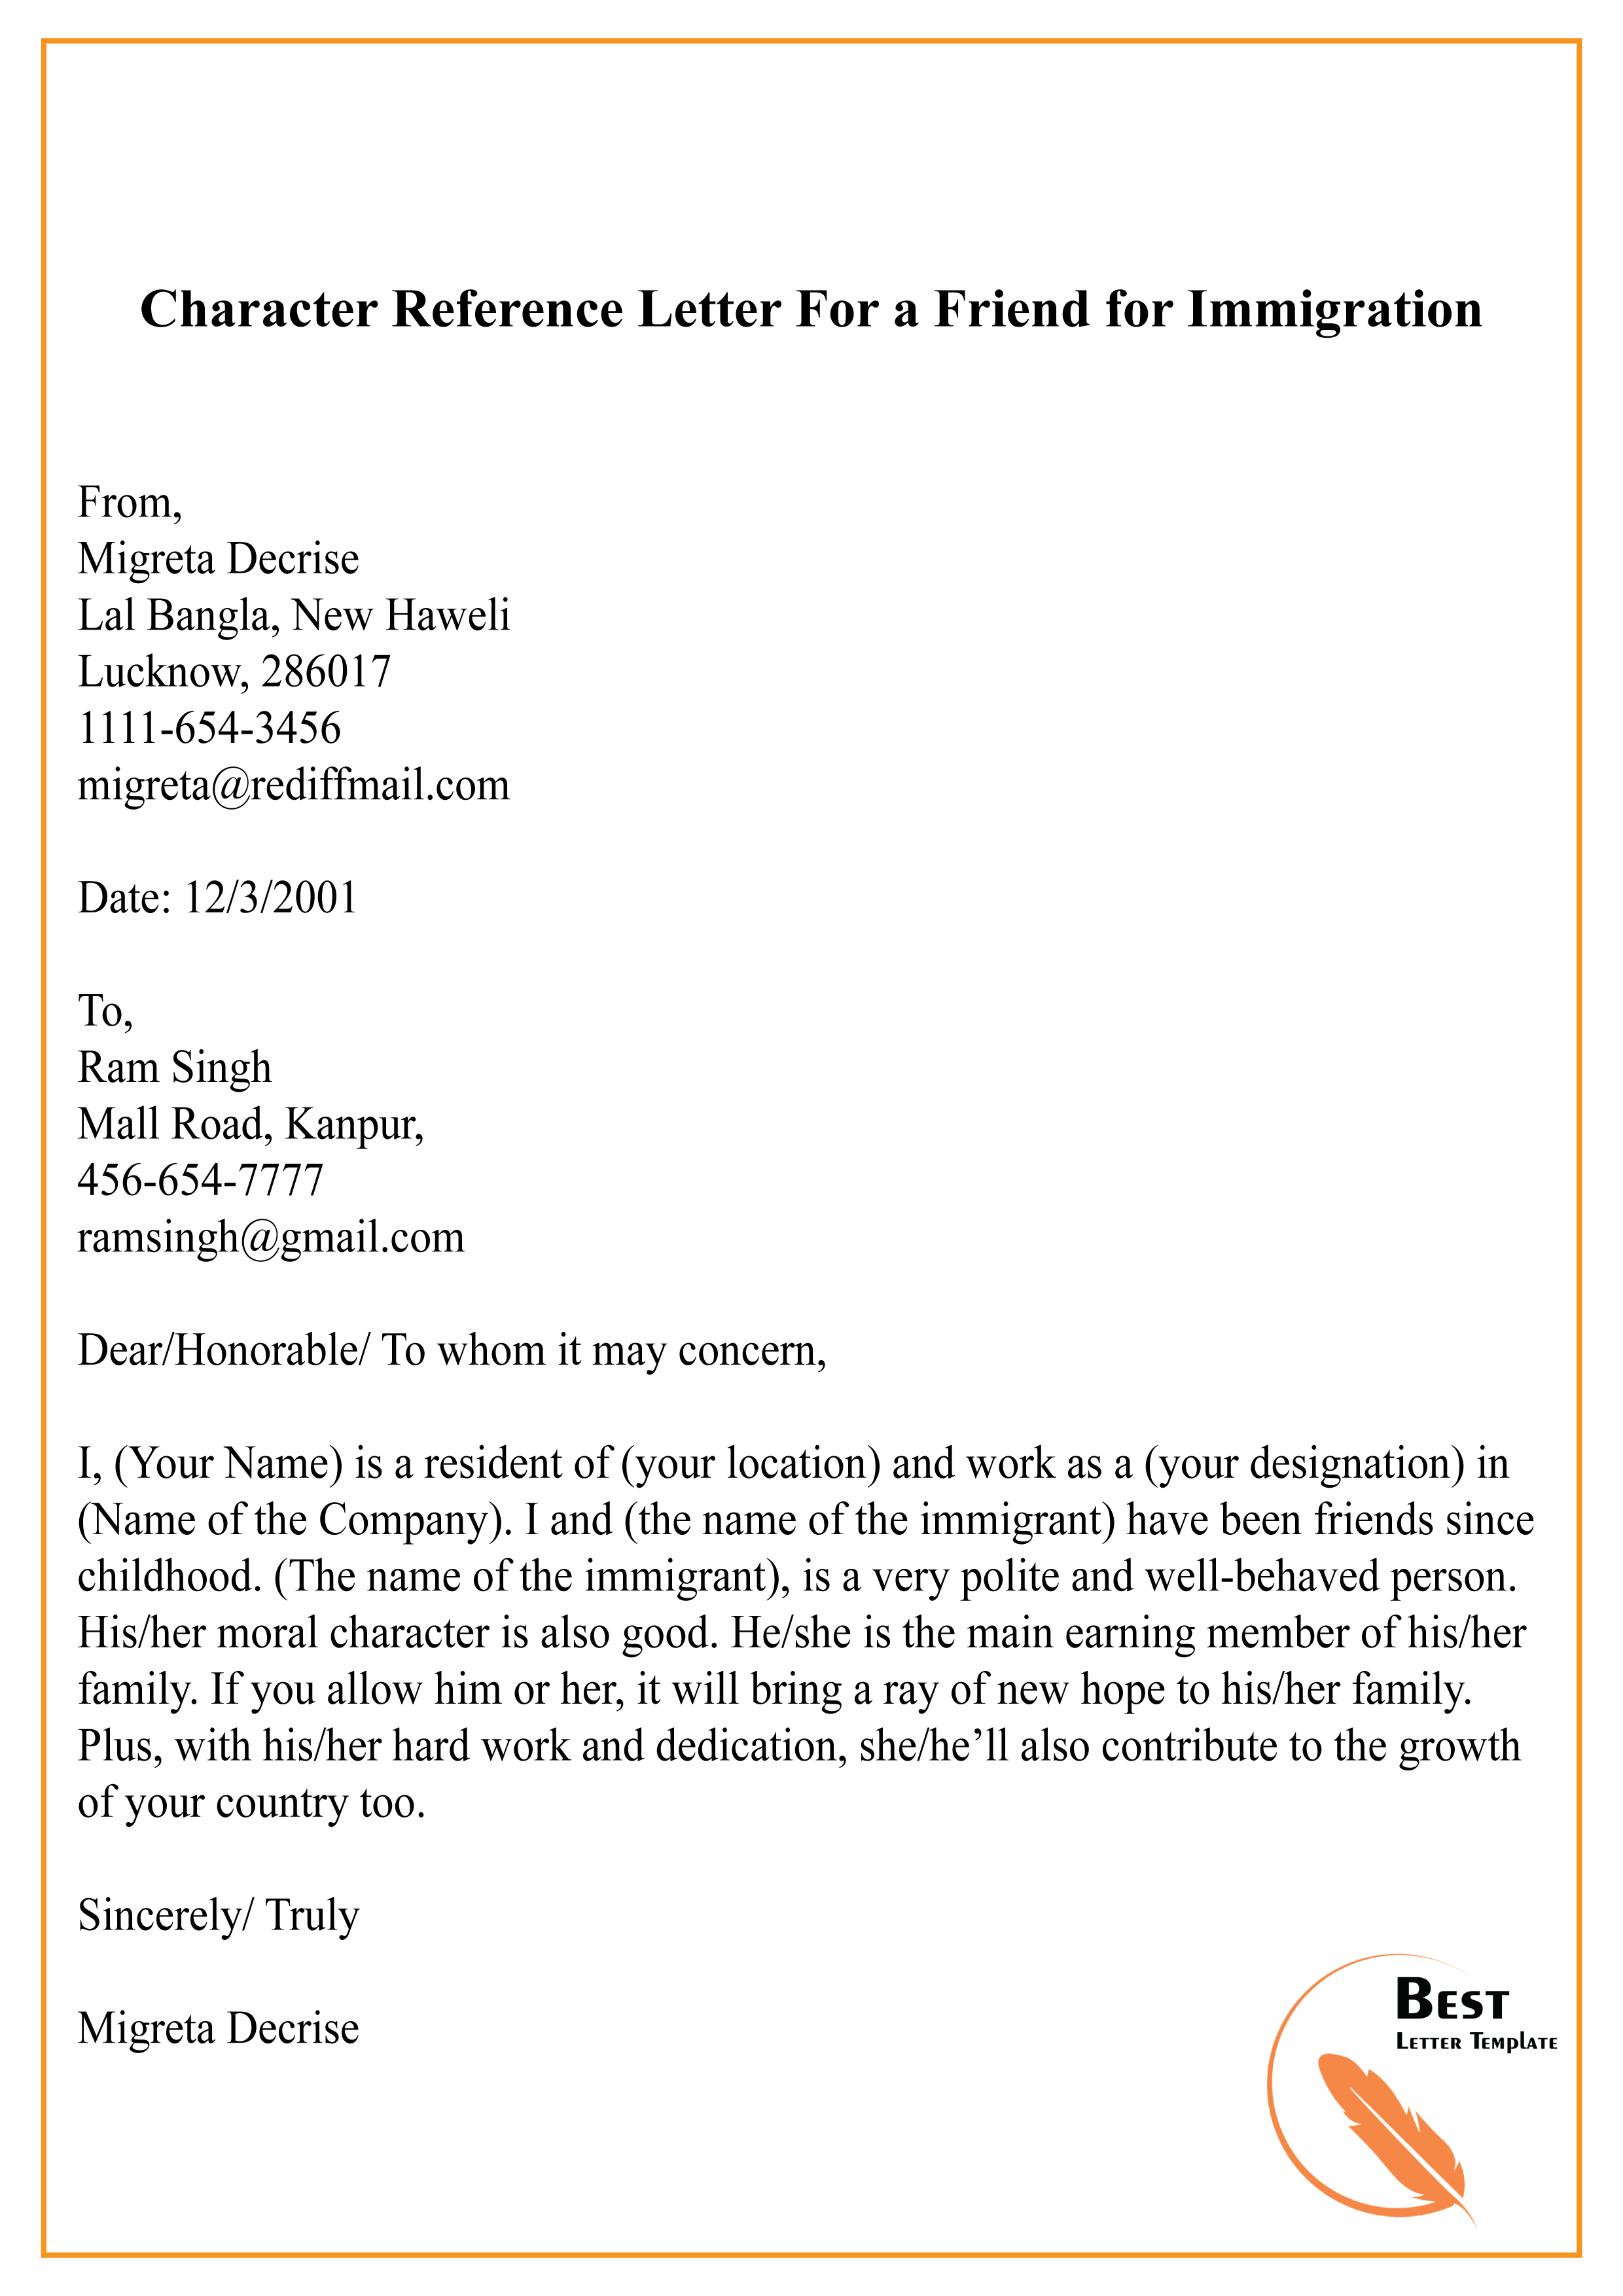 Personal Reference Letter For Immigration from bestlettertemplate.com